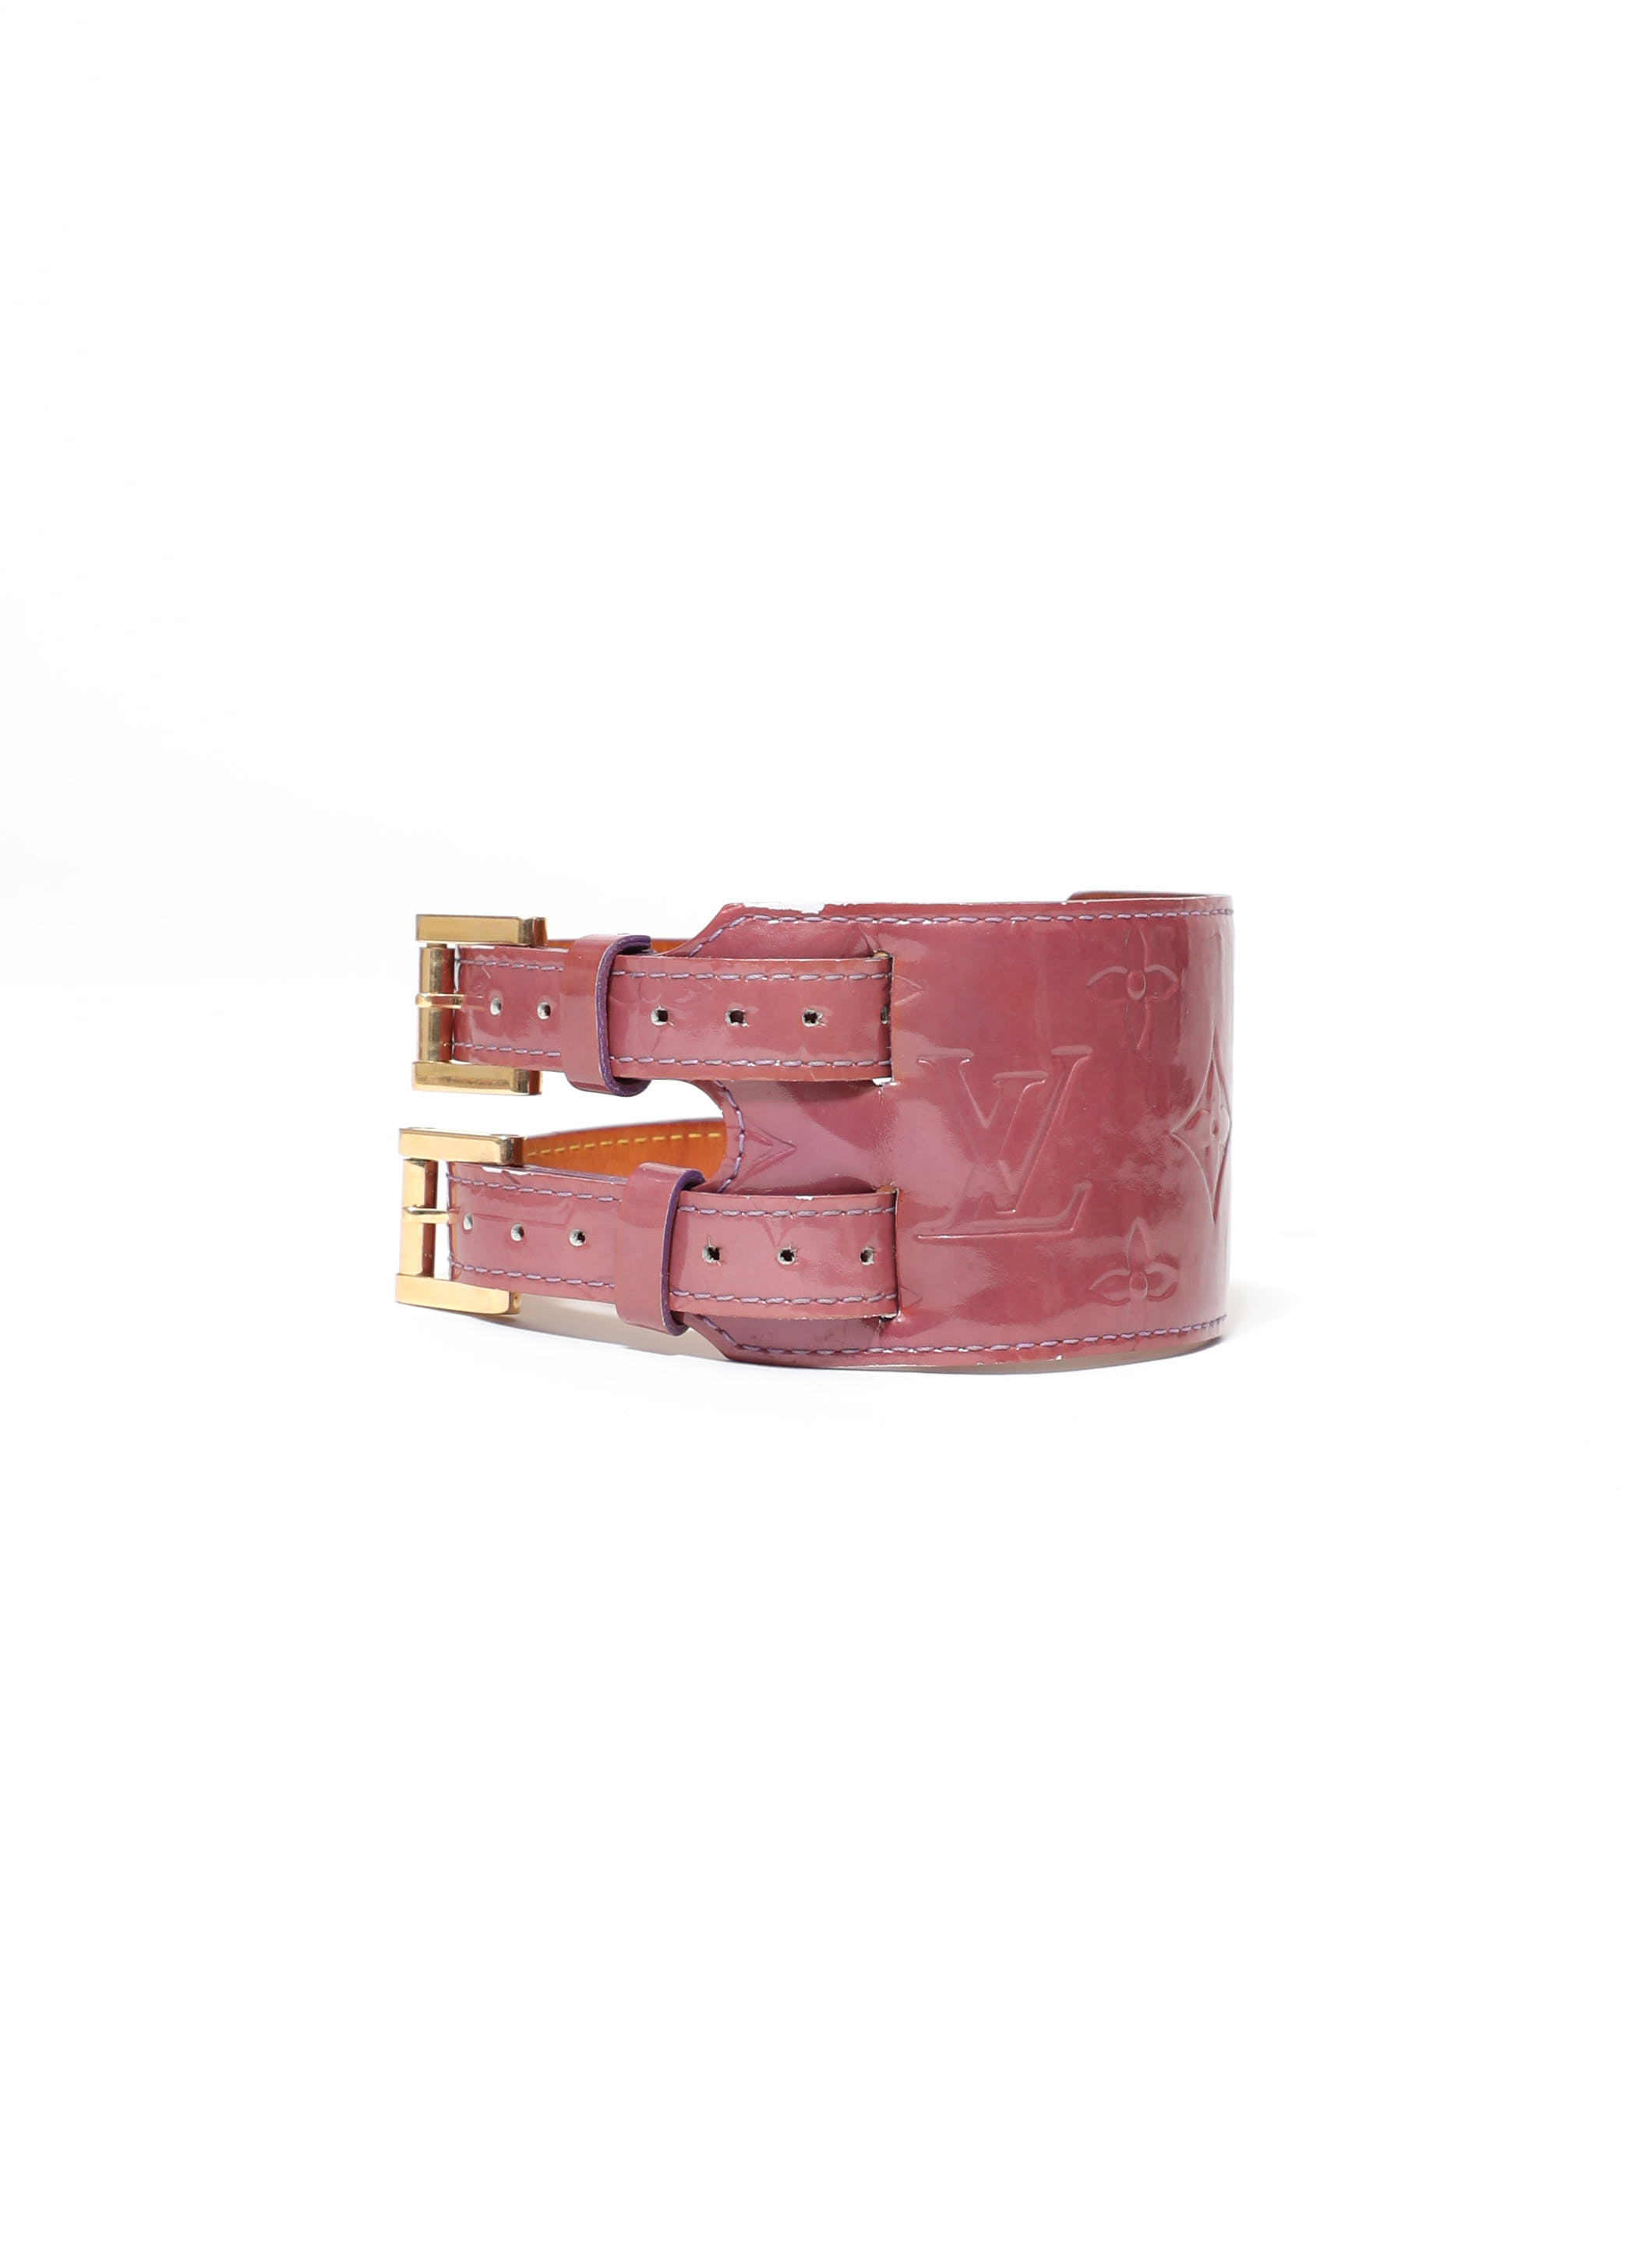 Louis Vuitton - Authenticated Bracelet - Leather Beige for Women, Very Good Condition